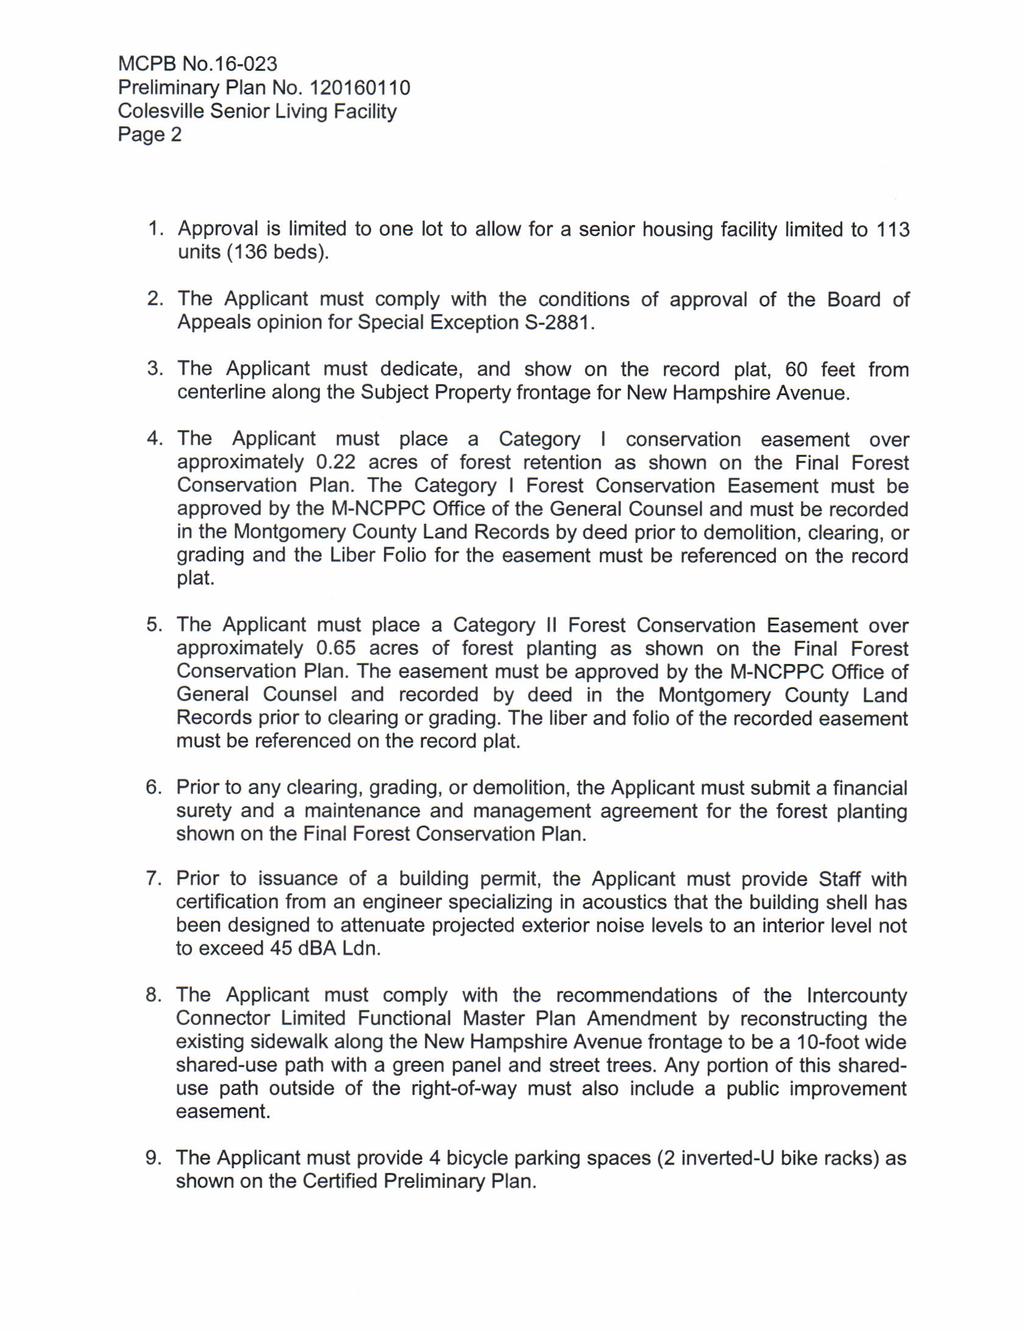 Page 2 1. 2. e 4. 5. o. 7. 8. o Approval is limited to one lot to allow for a senior housing facility limited to 113 units (136 beds).